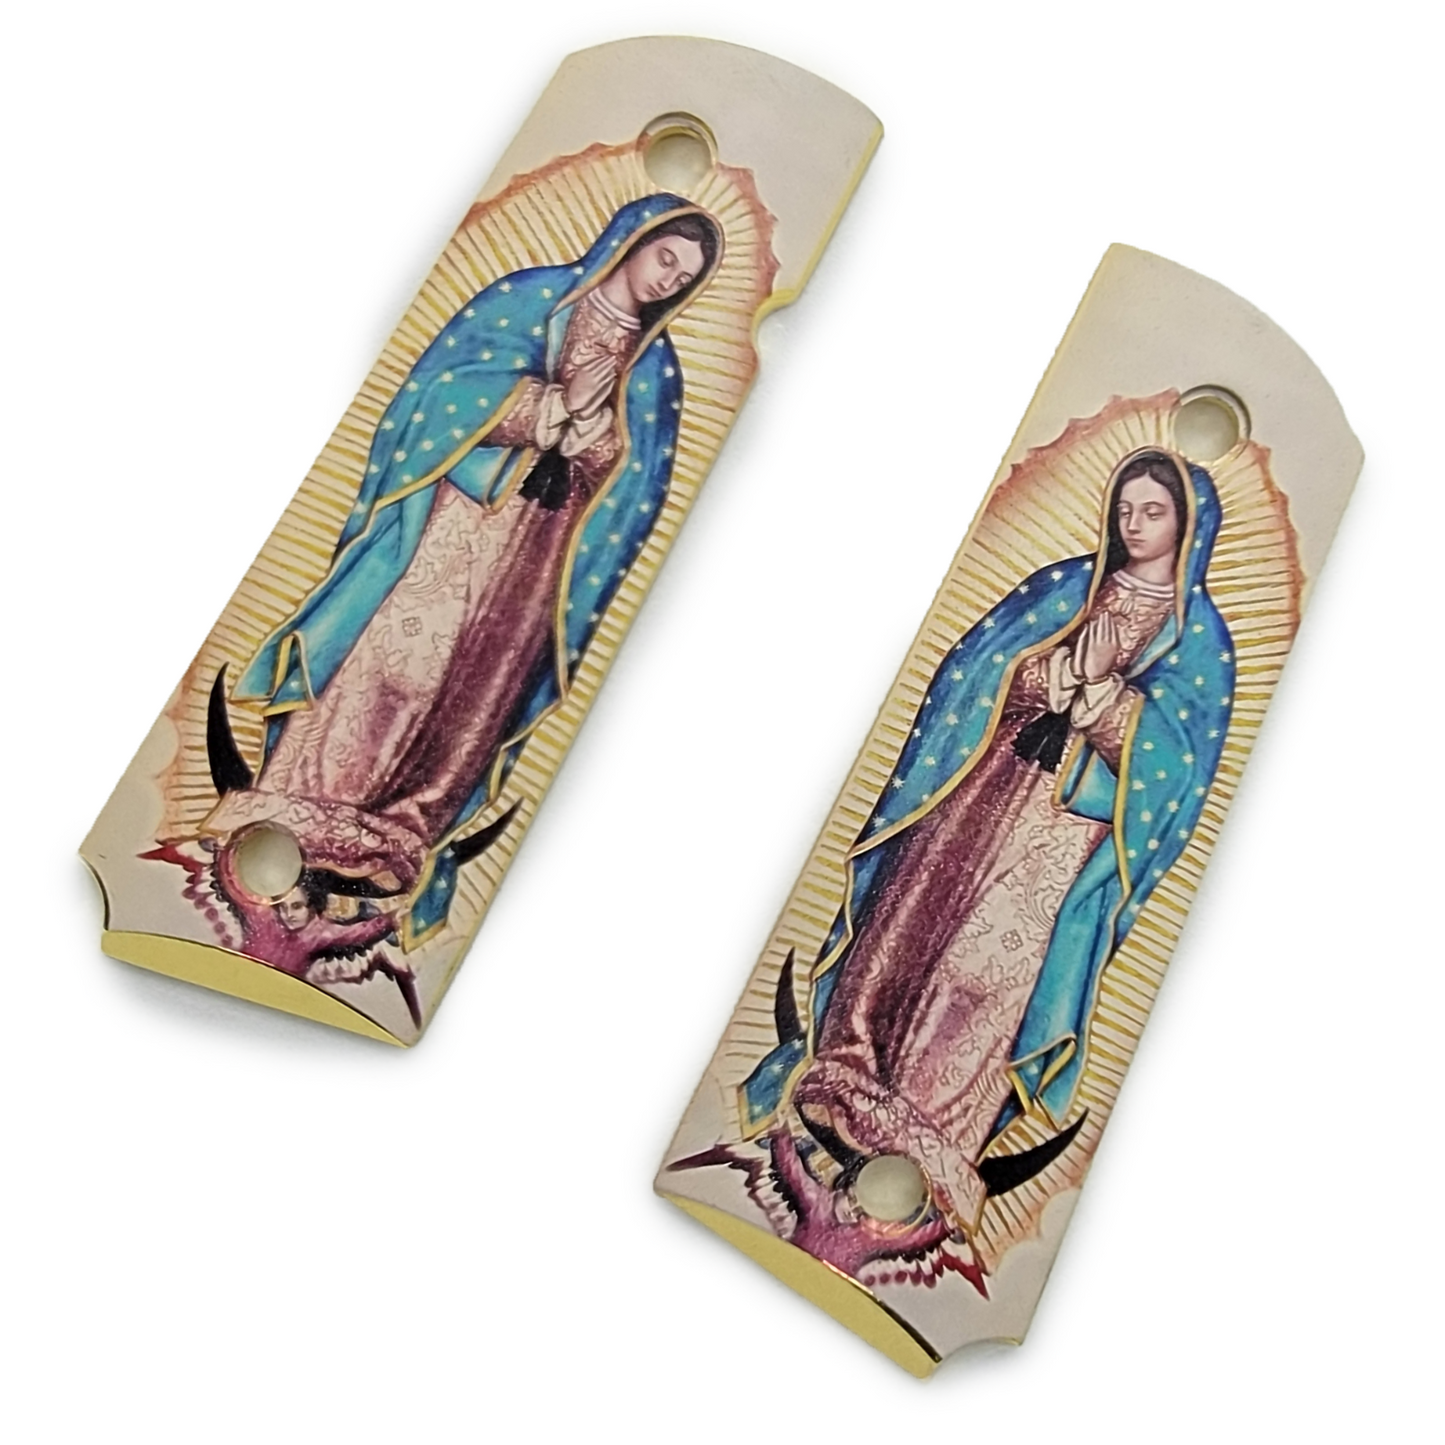 1911 GRIPS FULL SIZE - Metal - Virgin Mary W Ambi Safety #T-VM12